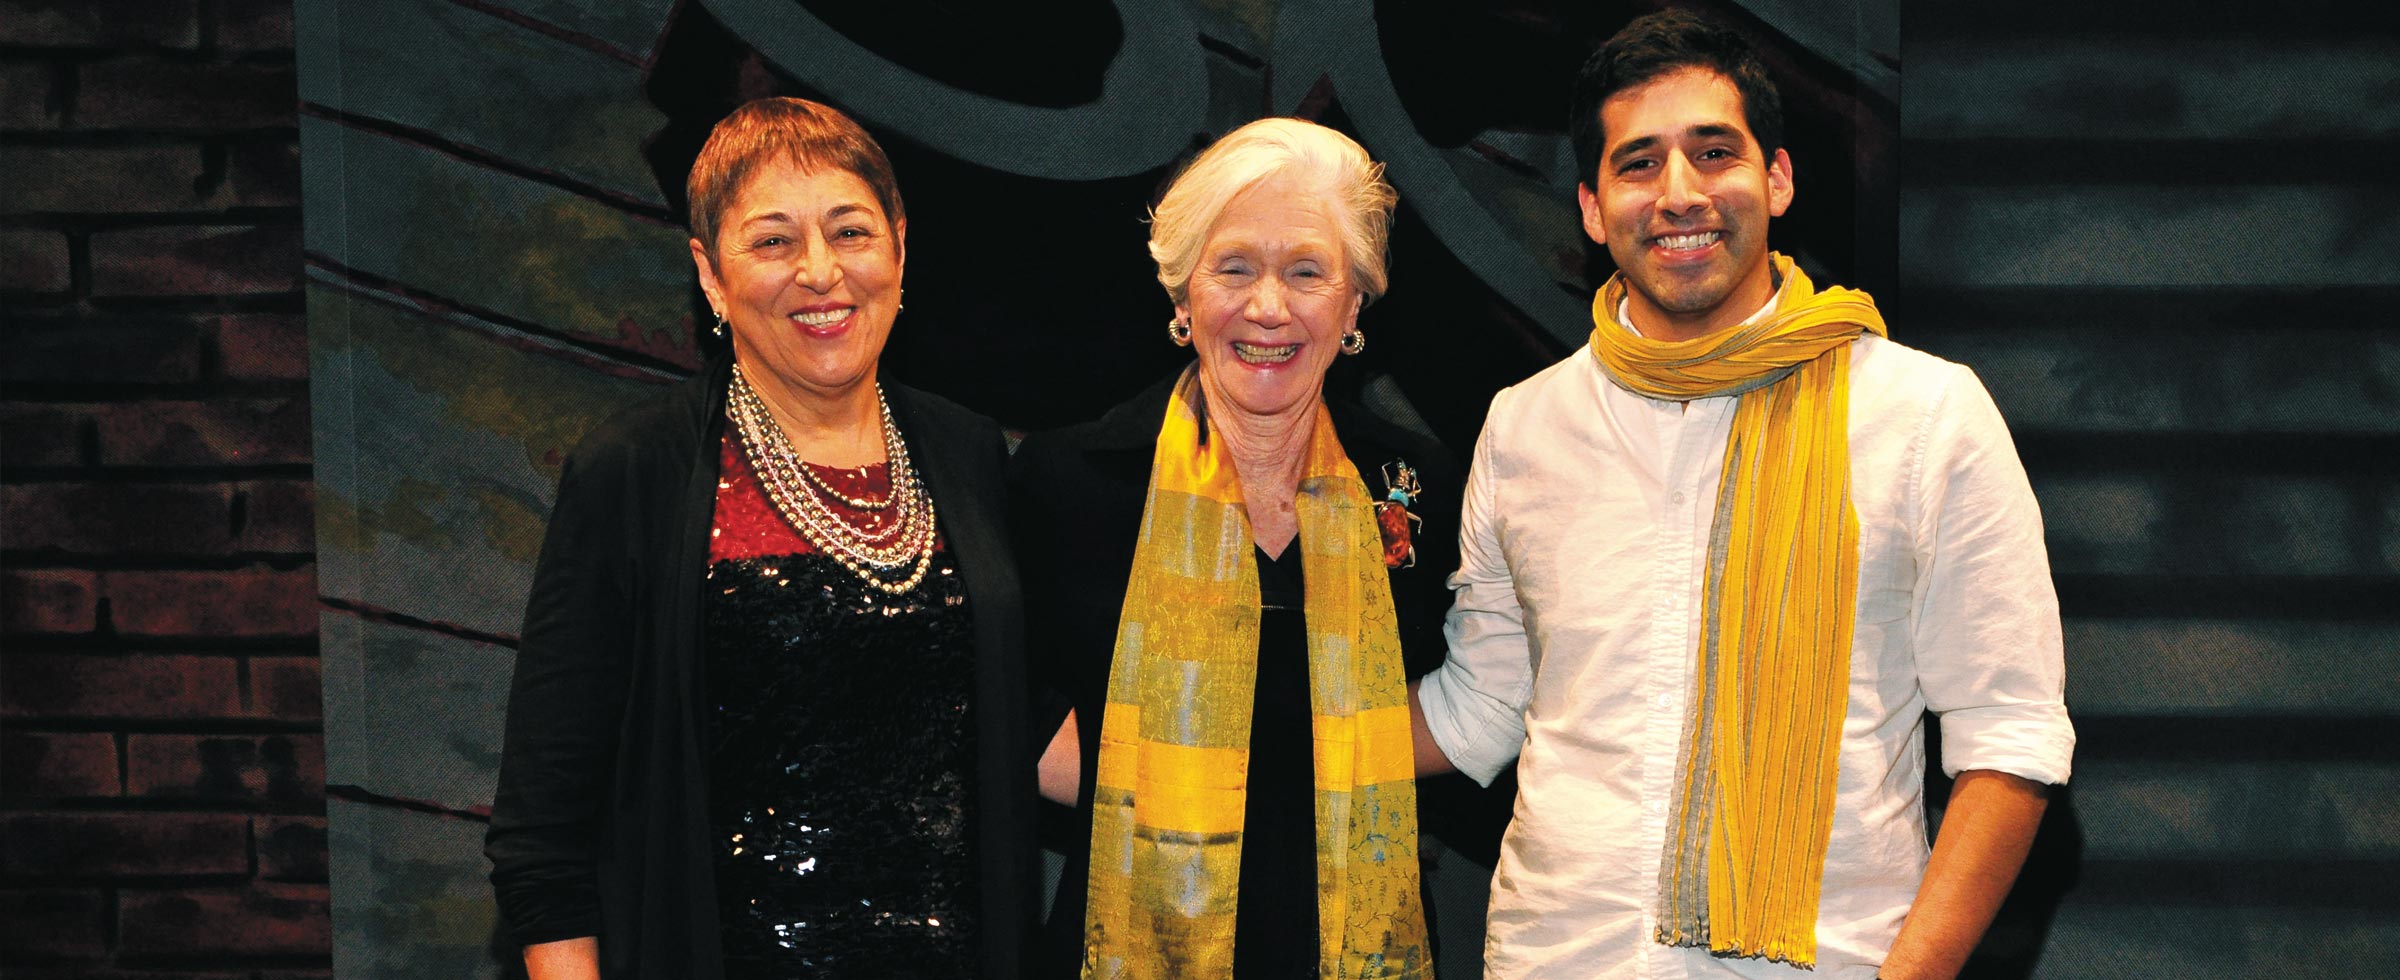 Carol R. Brown, center, with 2012 awardees Toi Derricotte and John Peña at the ceremony naming the program after Brown.